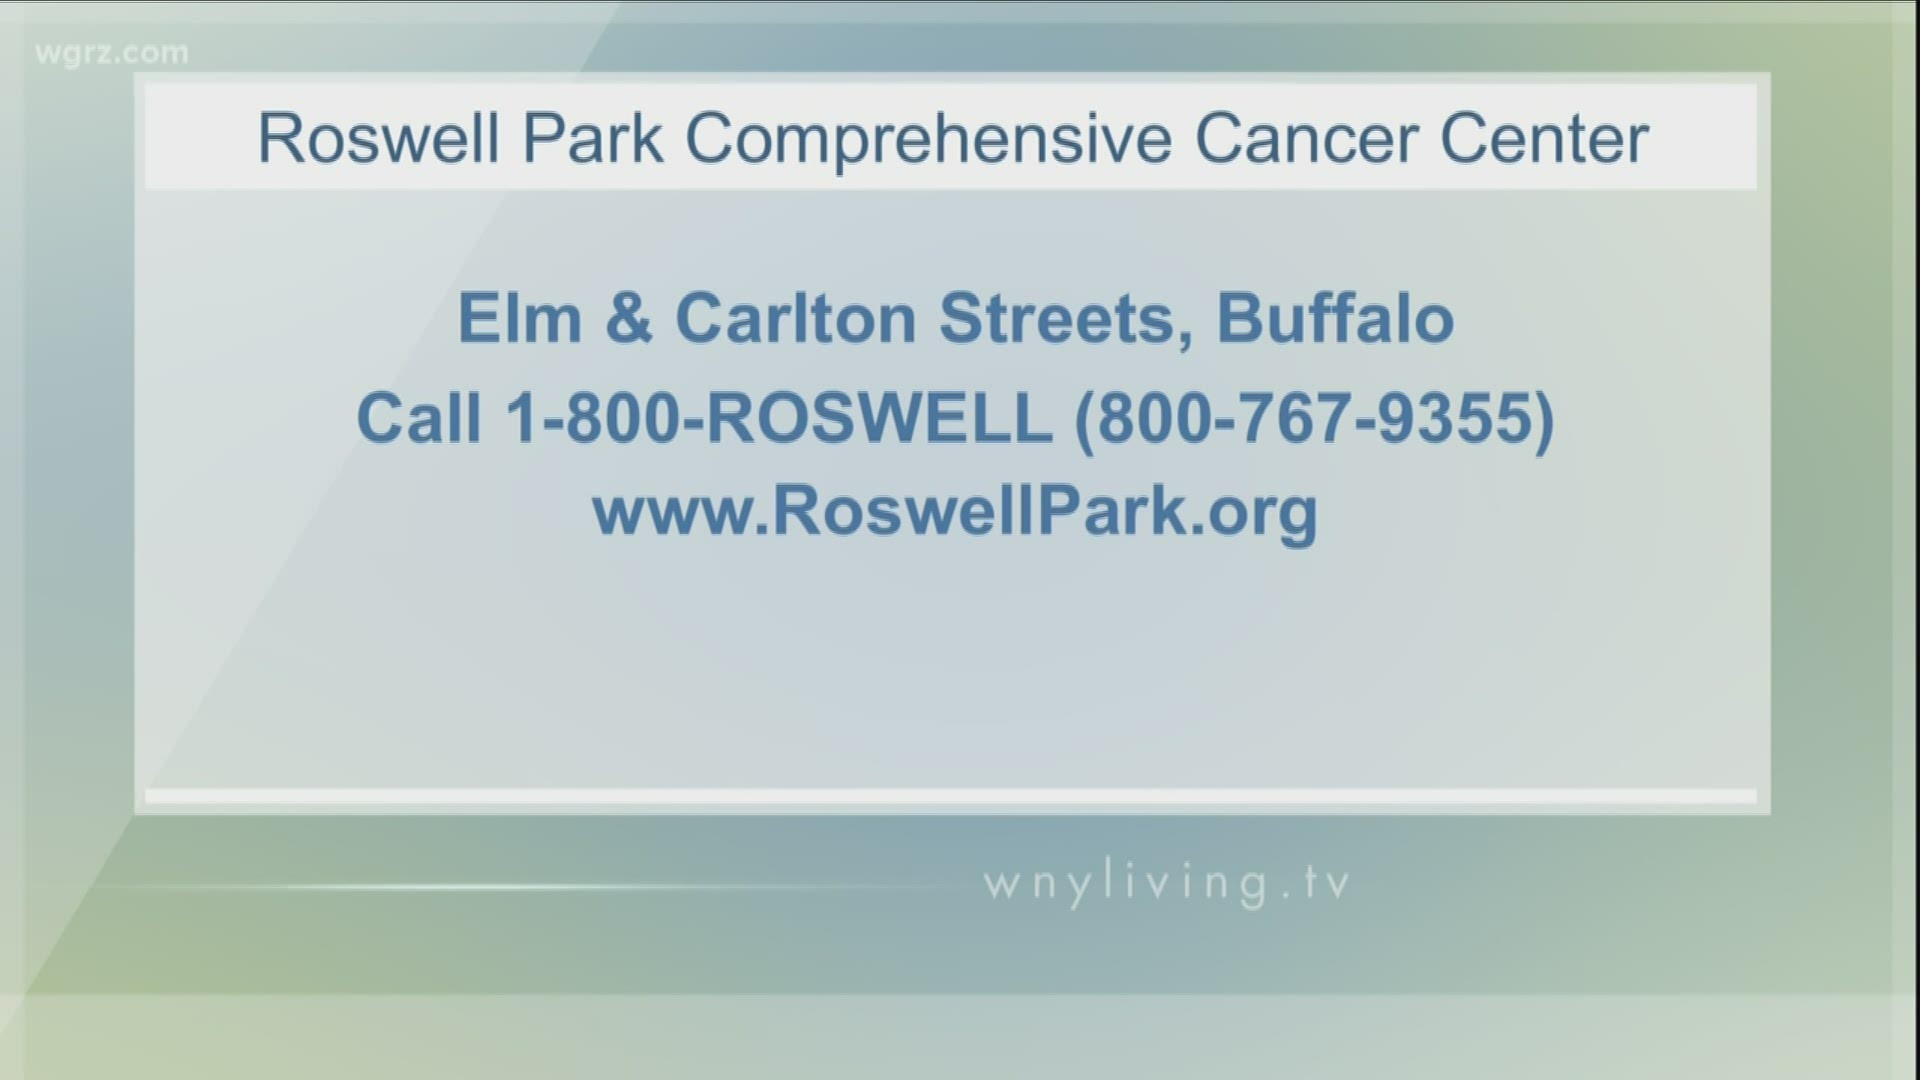 February 22 - Roswell Park Comprehensive Cancer Center (THIS VIDEO IS SPONSORED BY ROSWELL PARK COMPREHENSIVE CANCER CENTER)